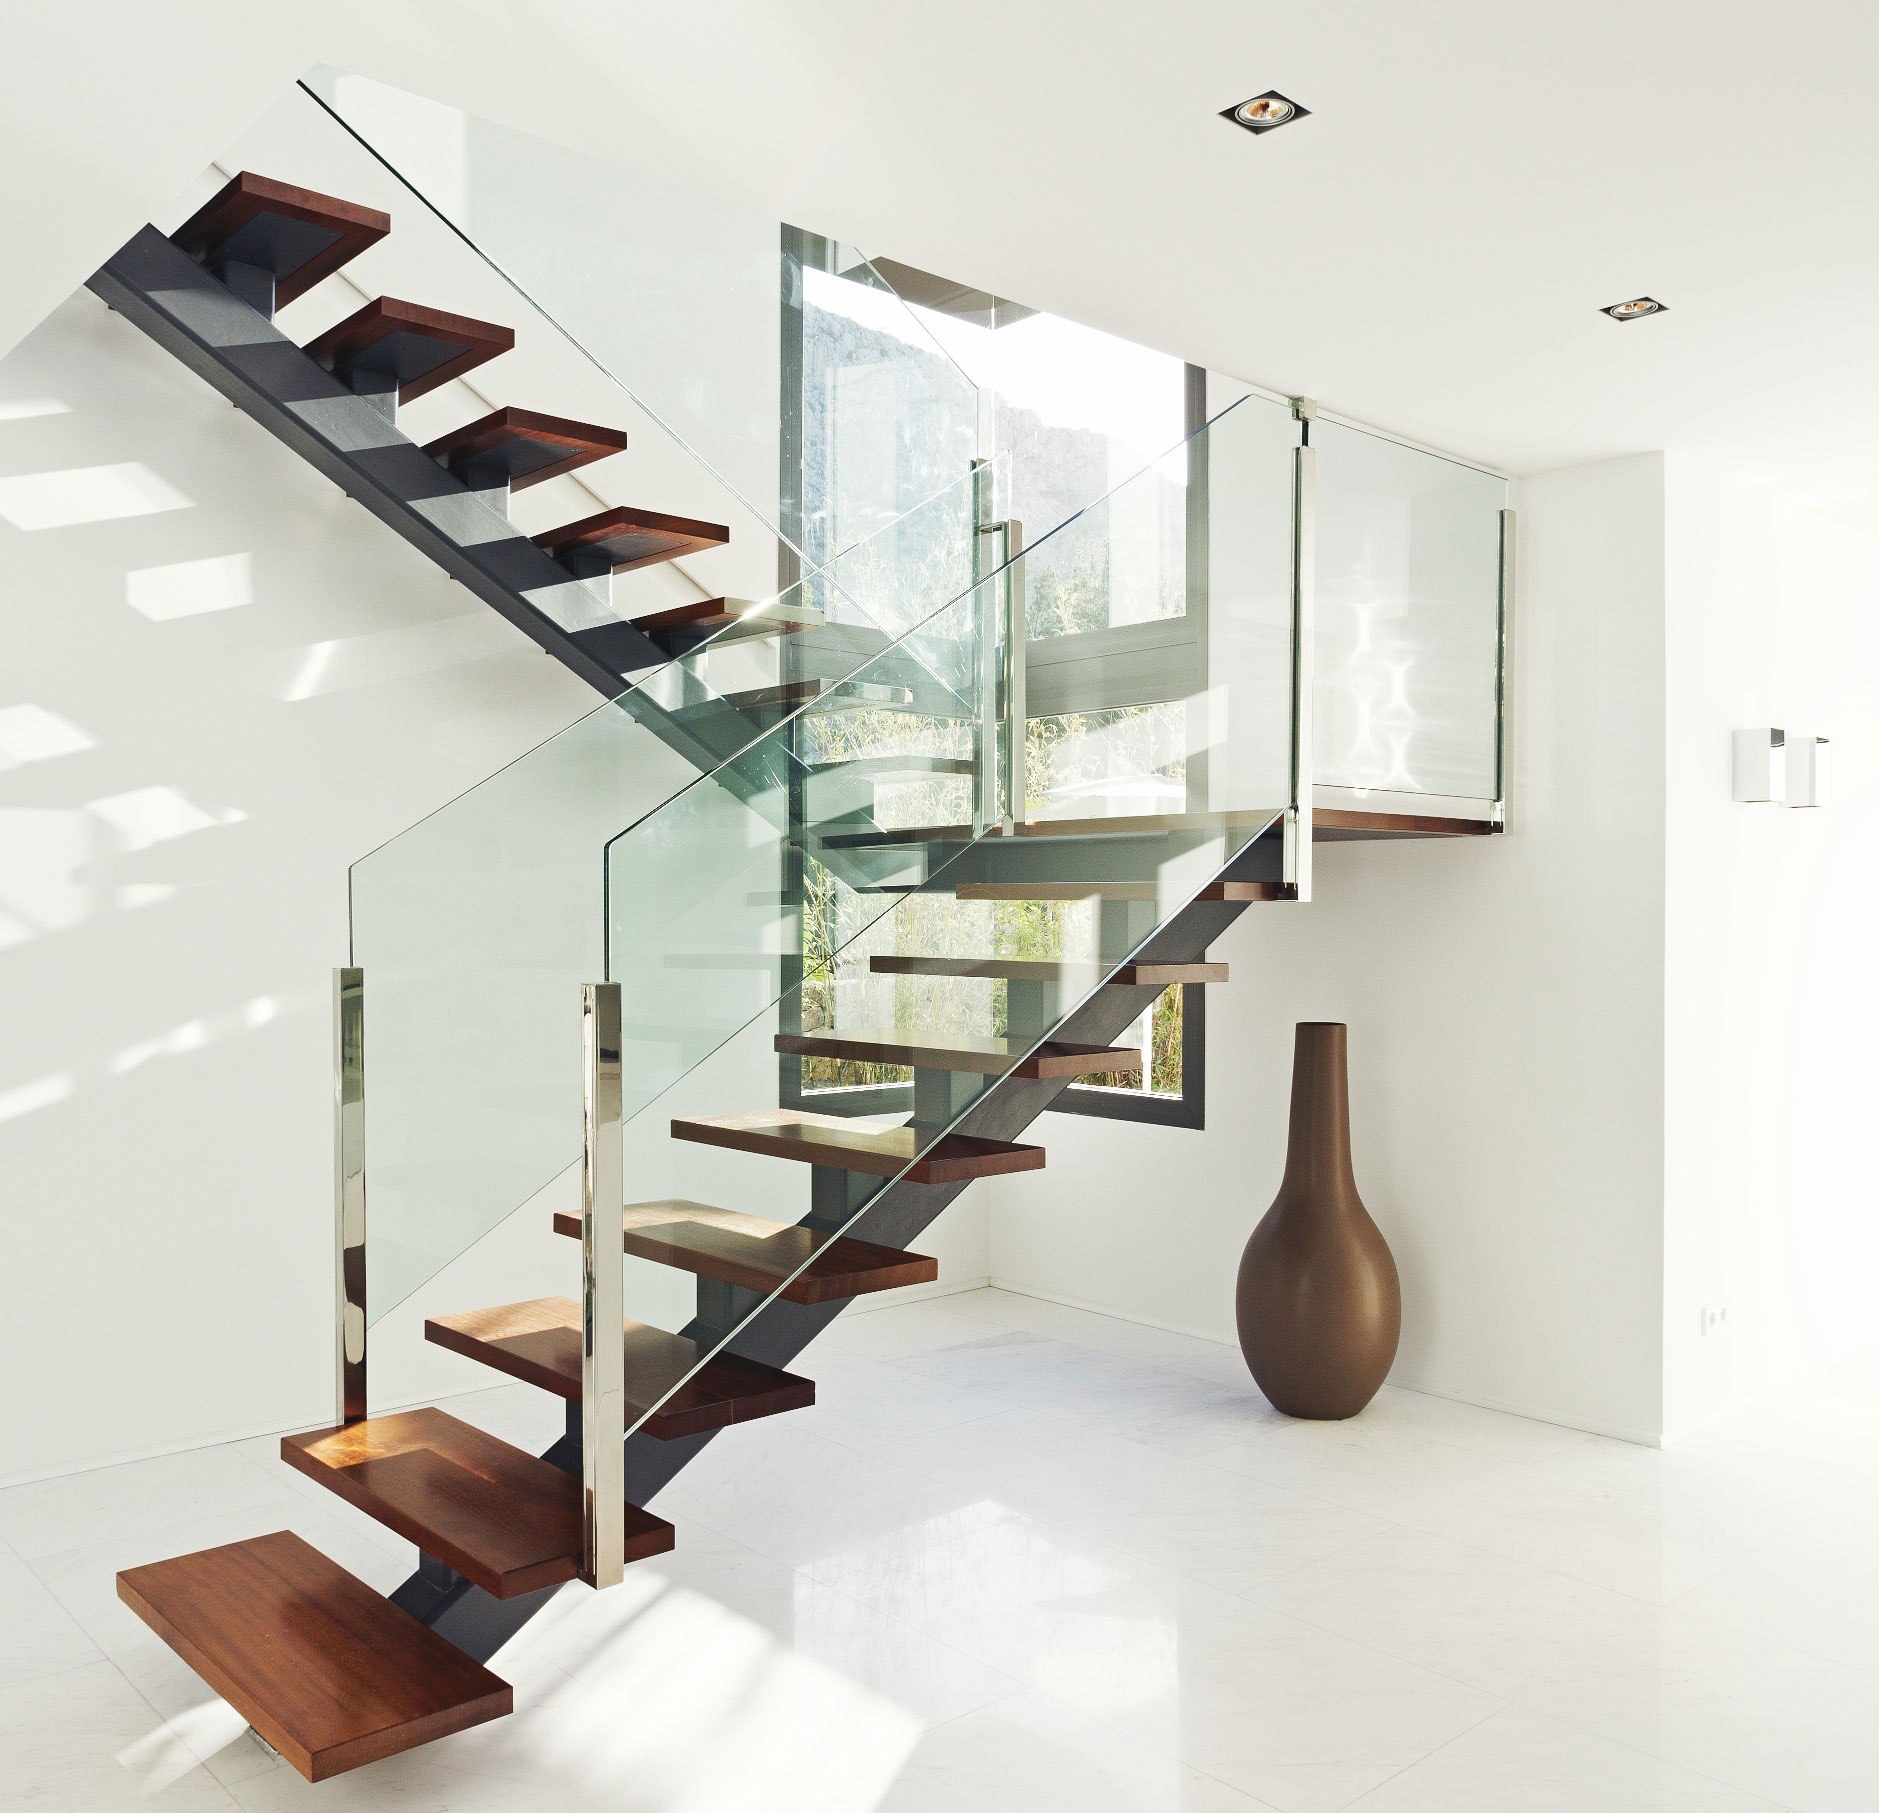 contemporary-metal-staircase-wooden-floating-steps-glass-railing-panes-design-ideas